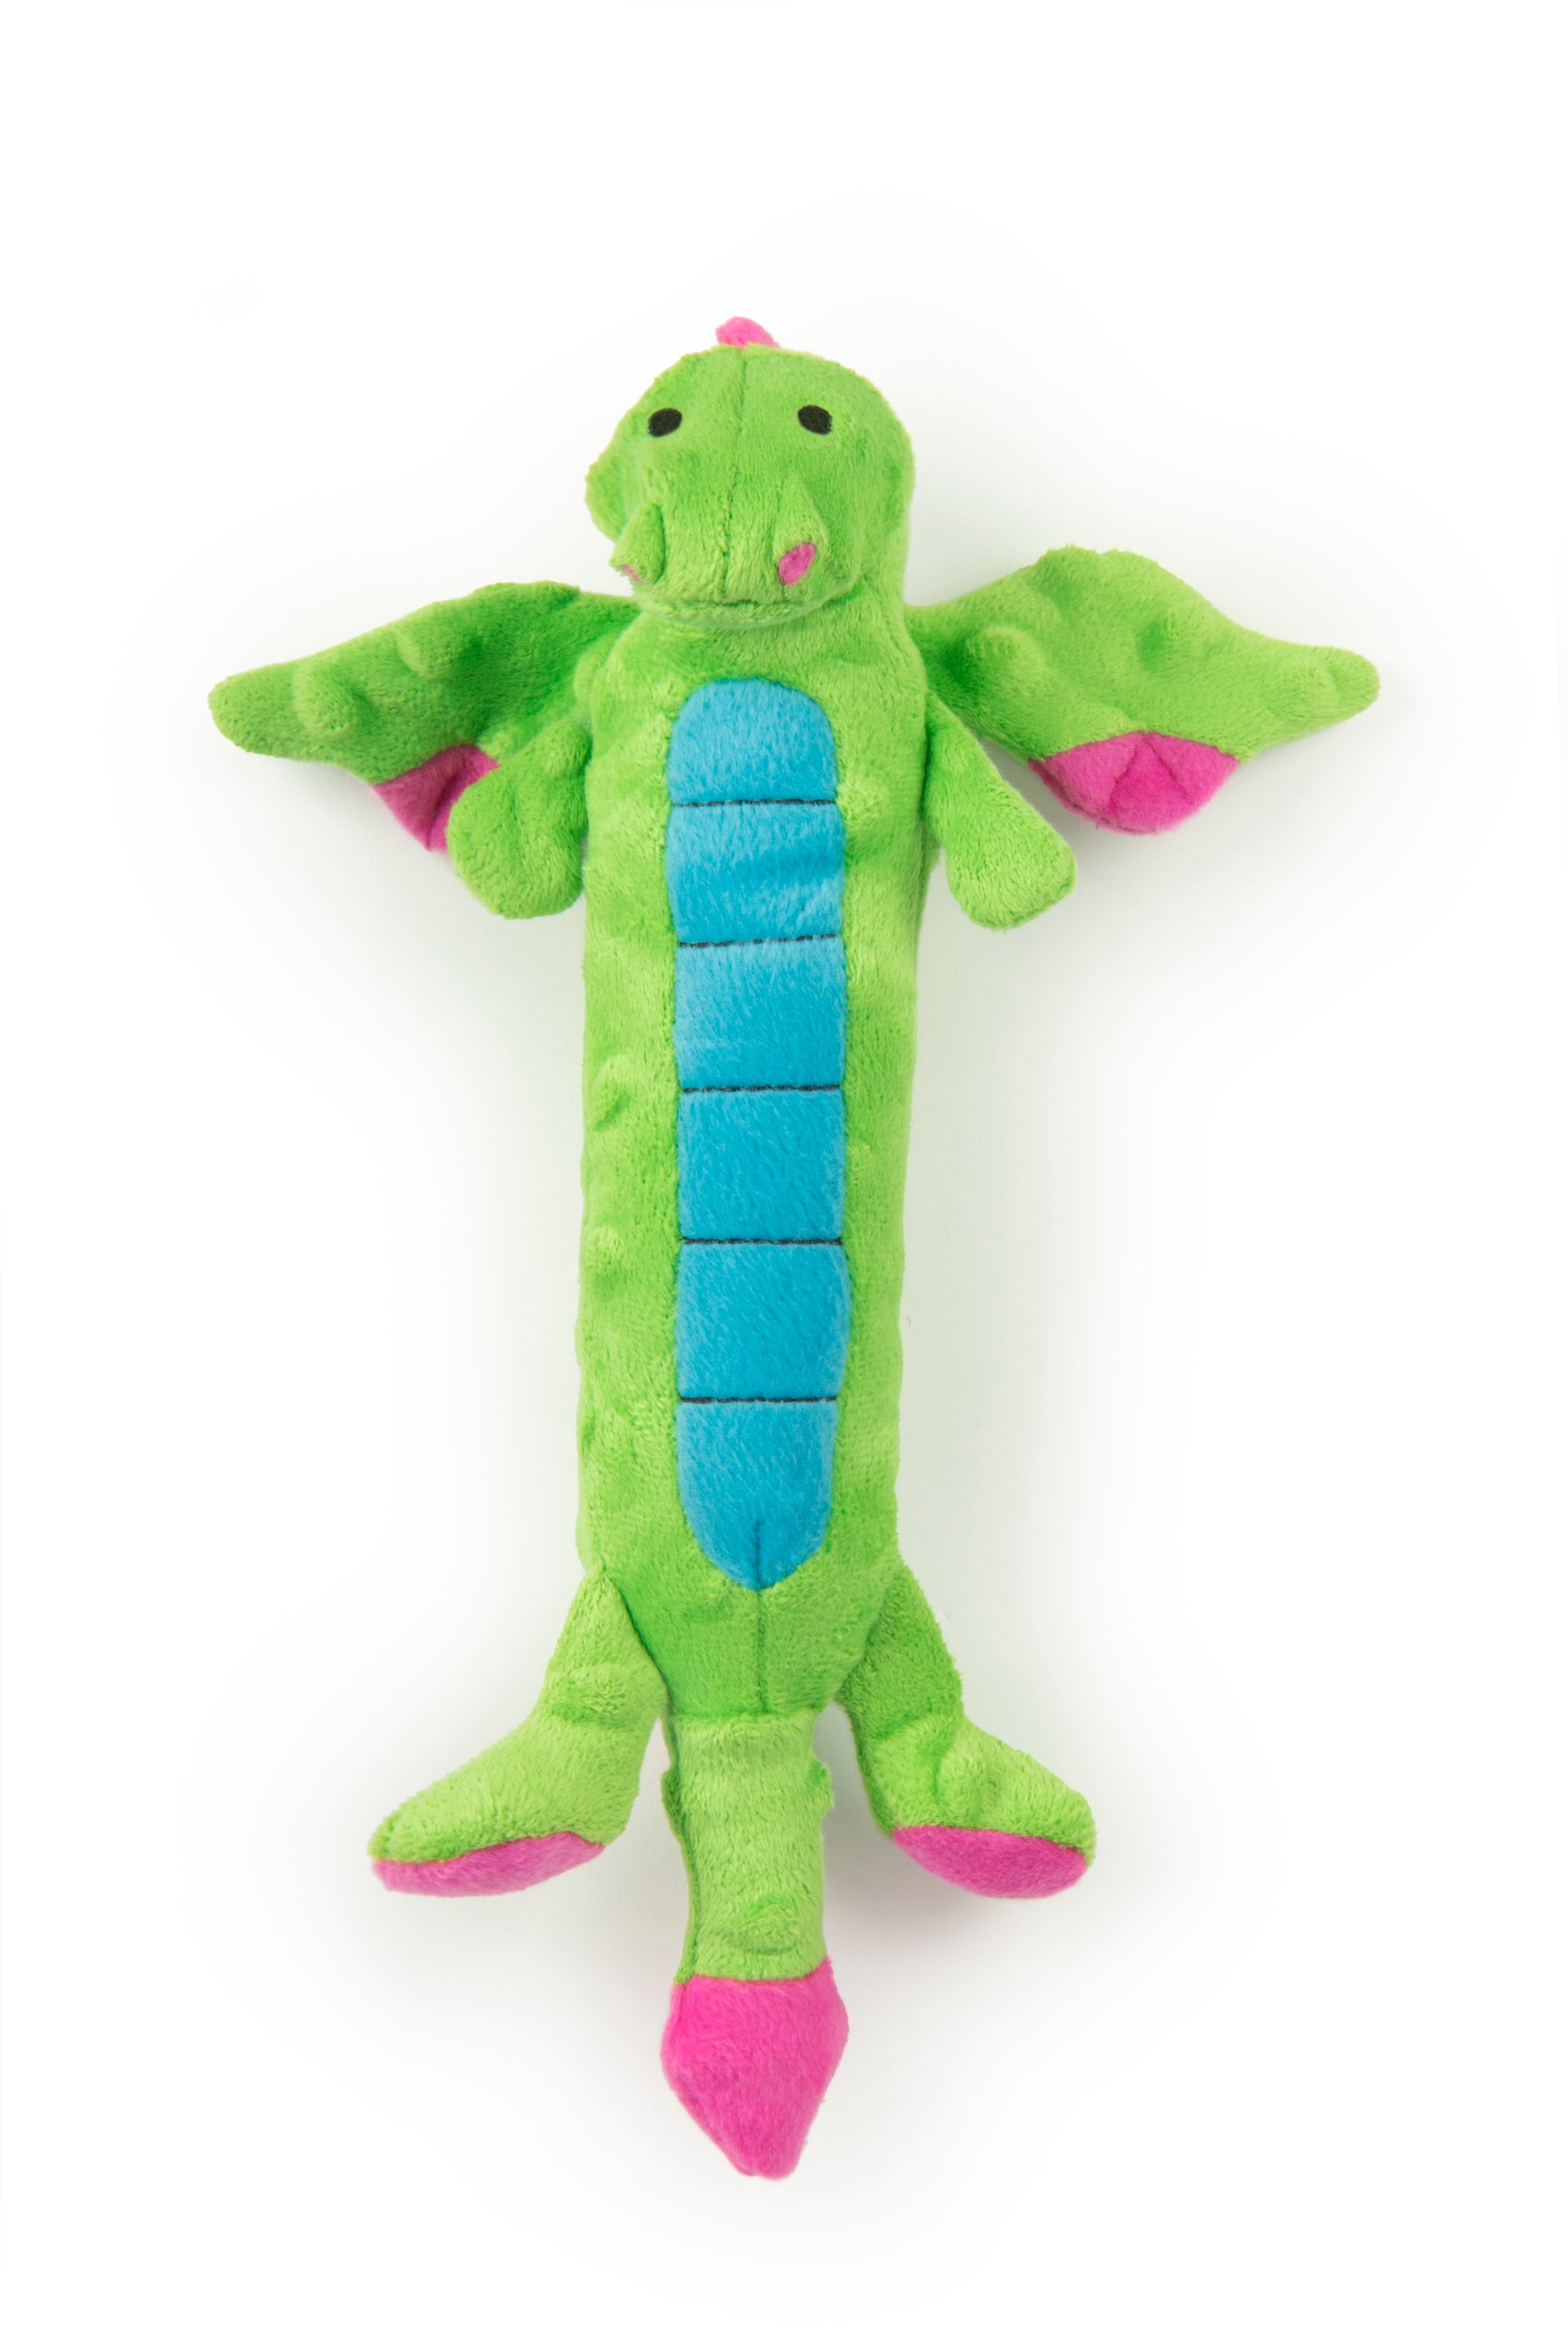 goDog Green Plush Tug Dog Toy with Squeaker - Soft and Durable Polyester -  Perfect for Cuddling and Interactive Playtime in the Pet Toys department at